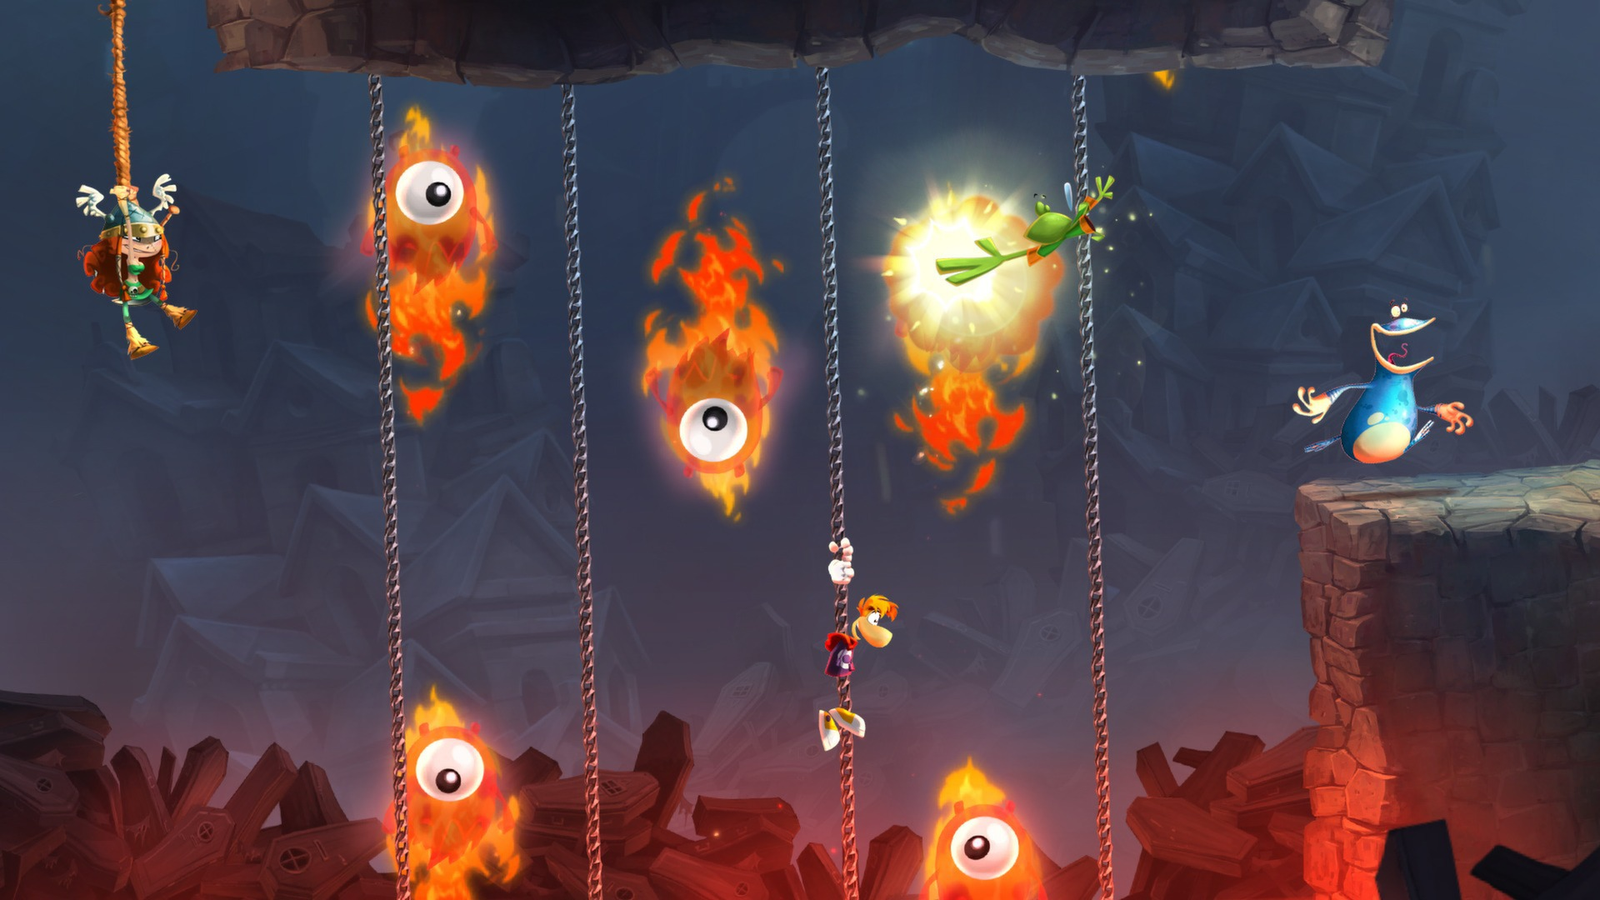 Pick up Rayman Legends for free on Epic this week